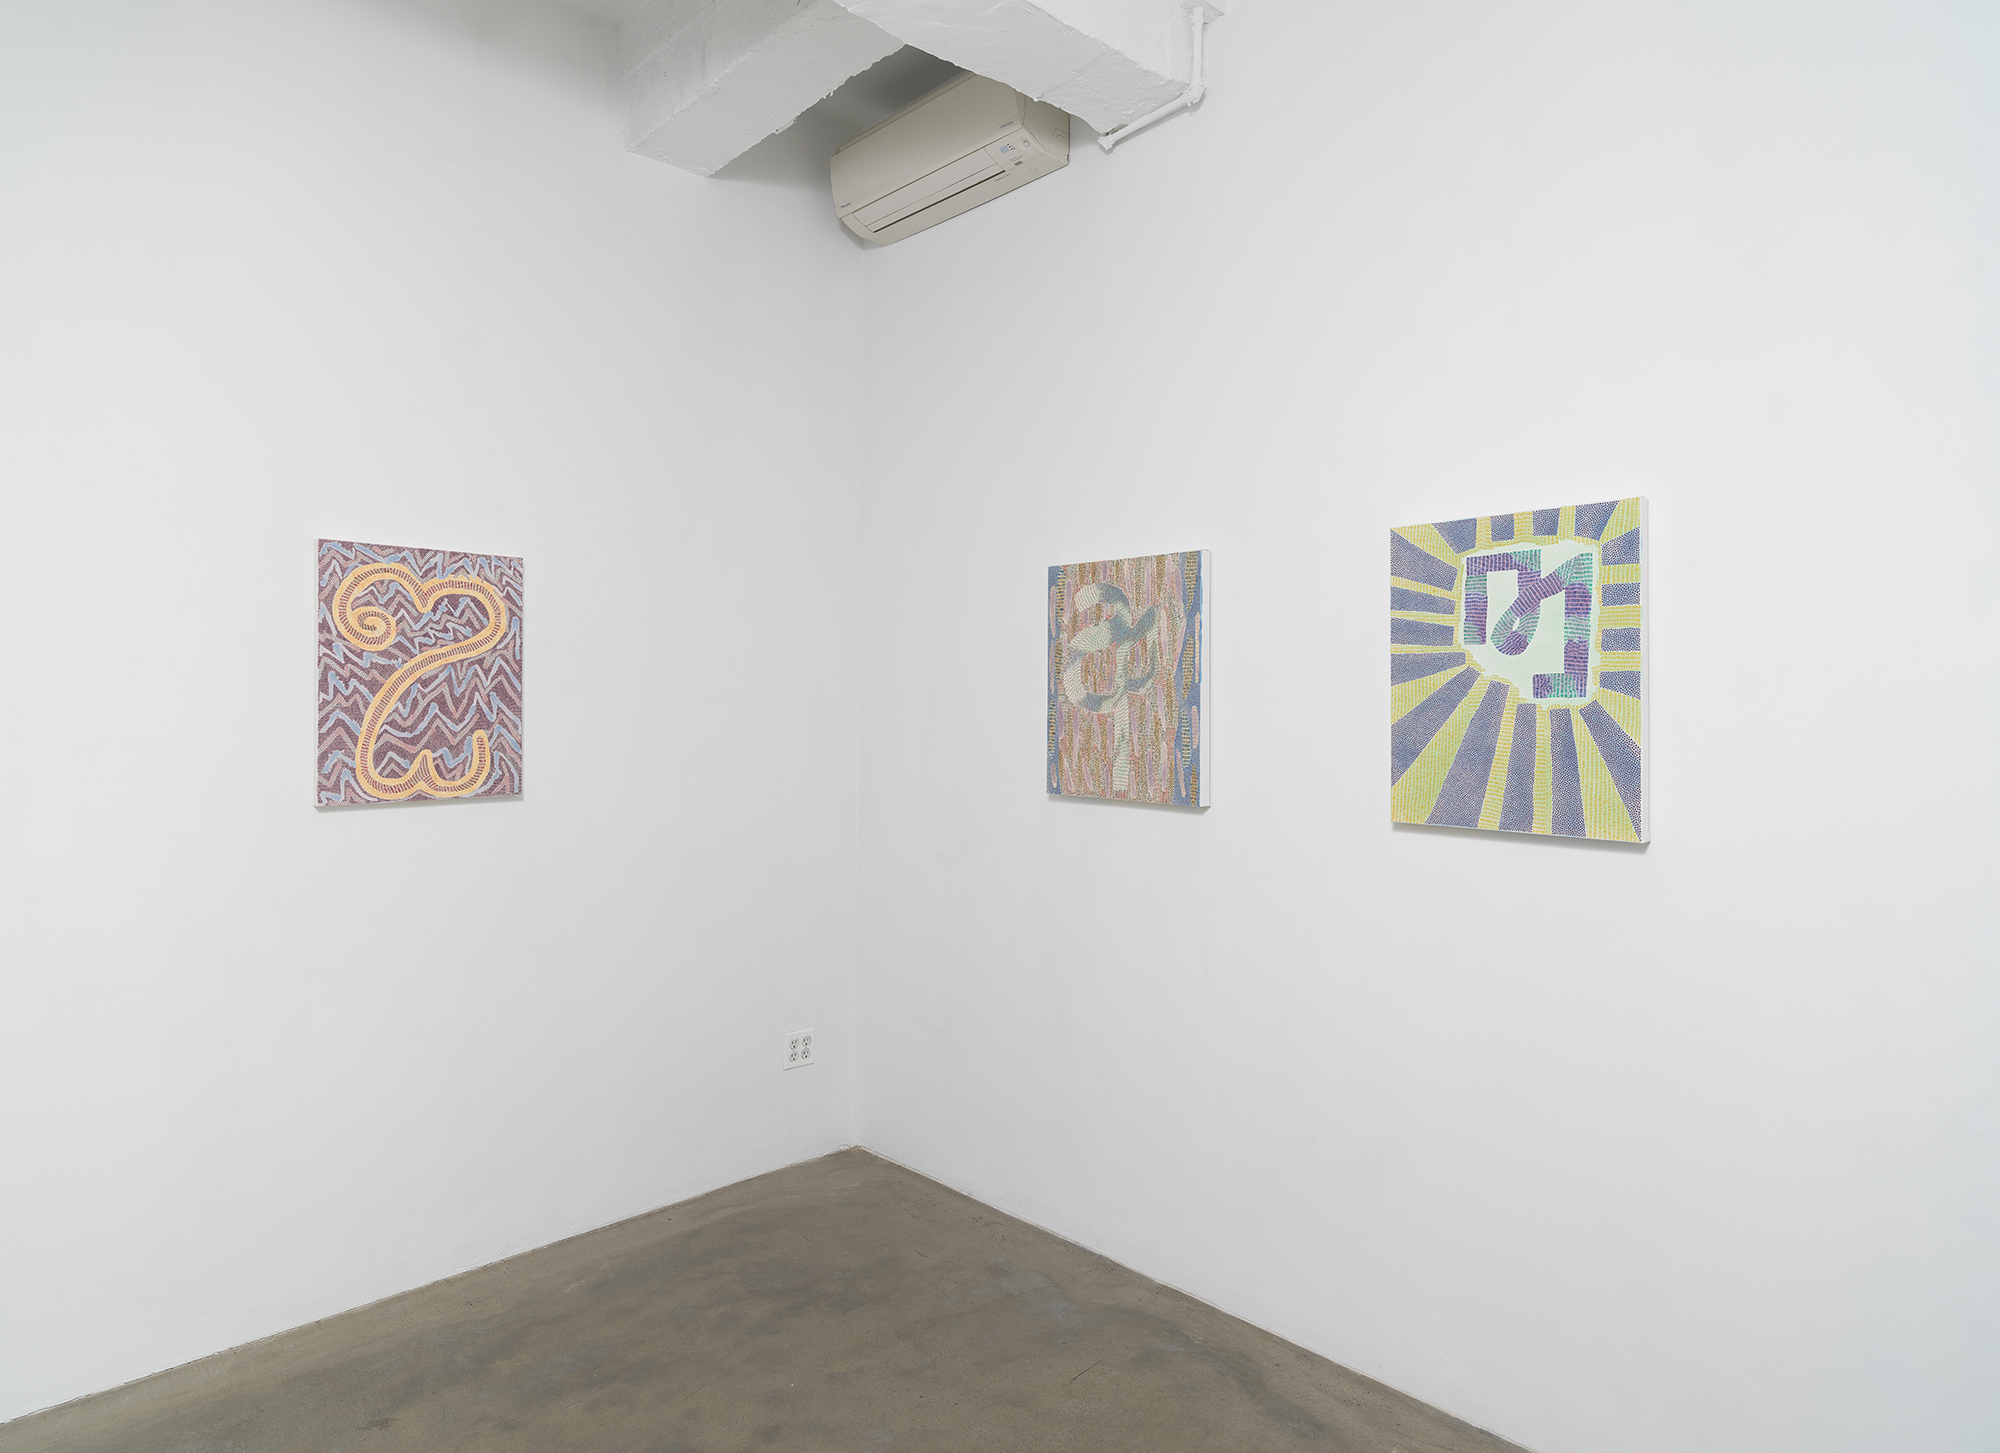 Installation view of Nadia Haji Omar 'Ellipsis' showing paintings on canvas